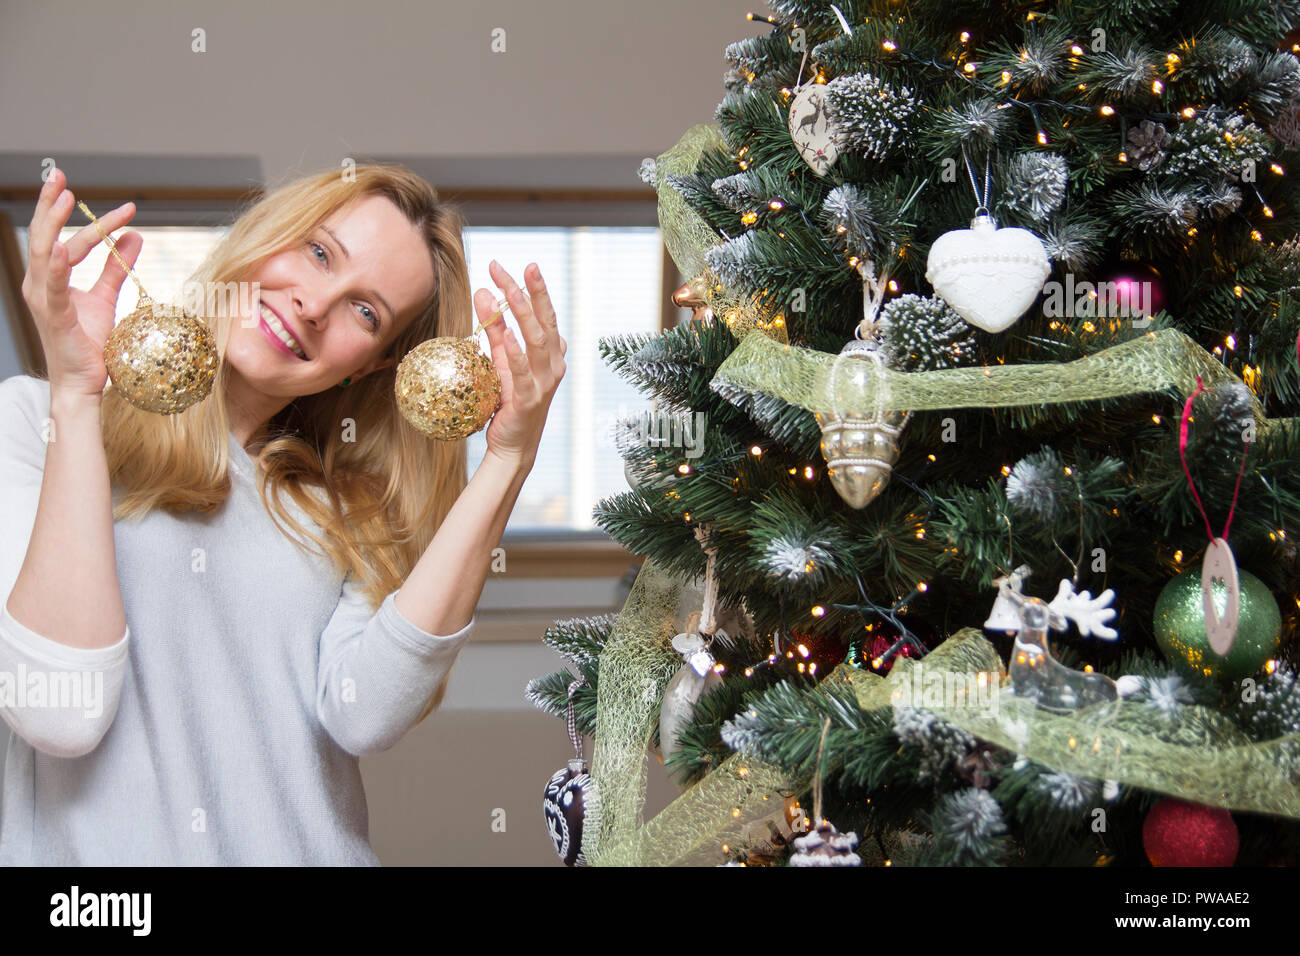 young woman decorating christmas tree Stock Photo